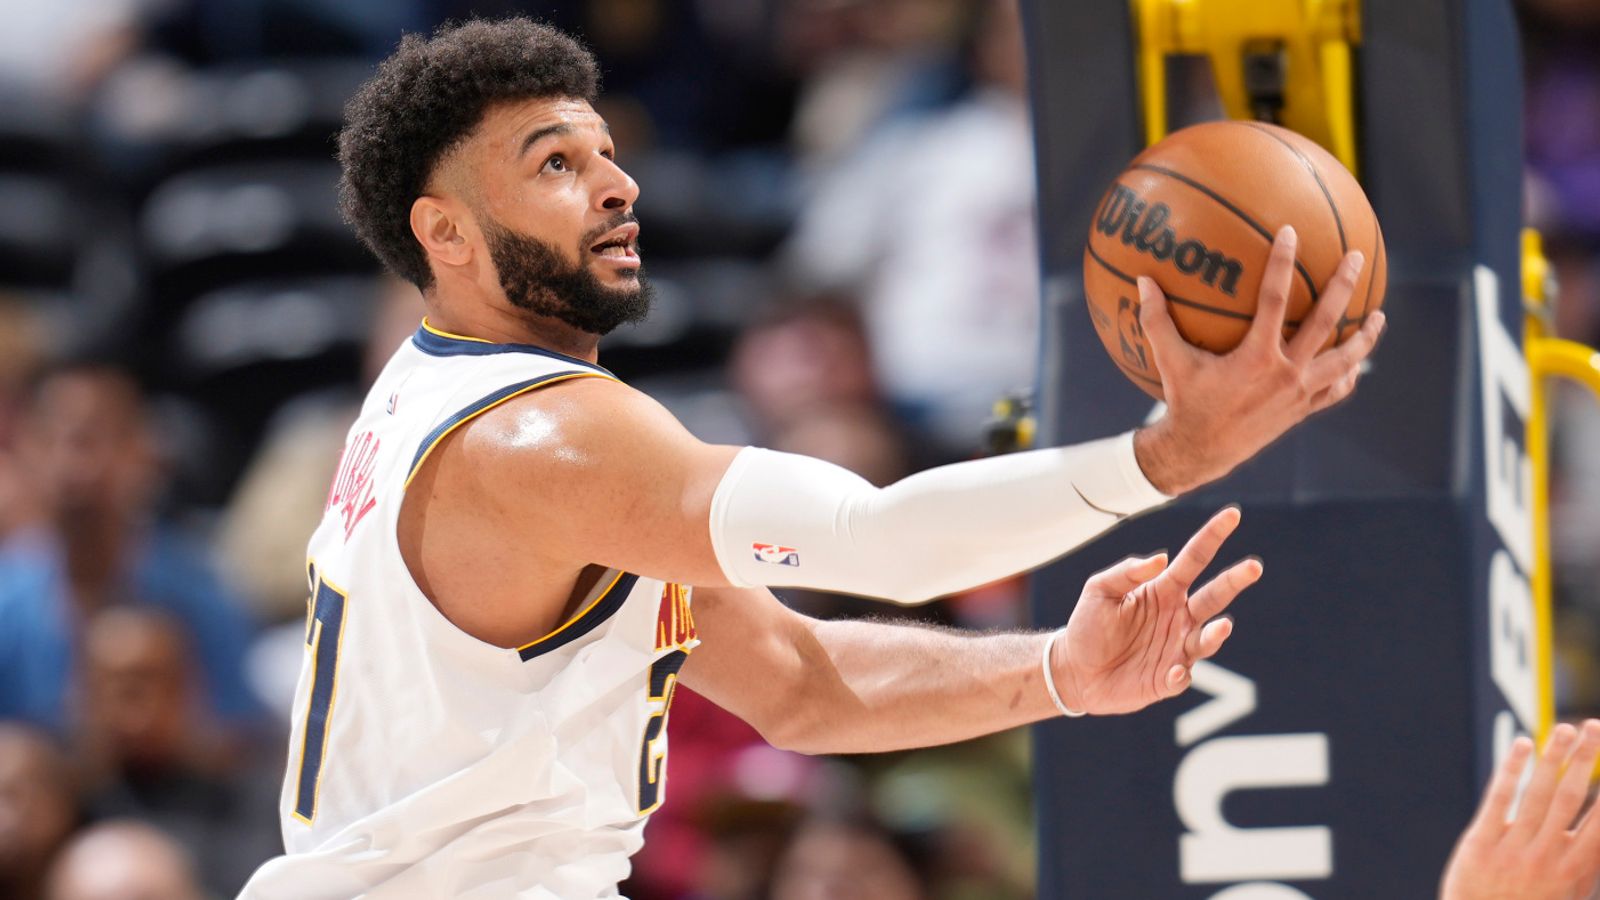 NBA round-up: Denver Nuggets’ Jamal Murray scores season-high 34 points against Los Angeles Lakers